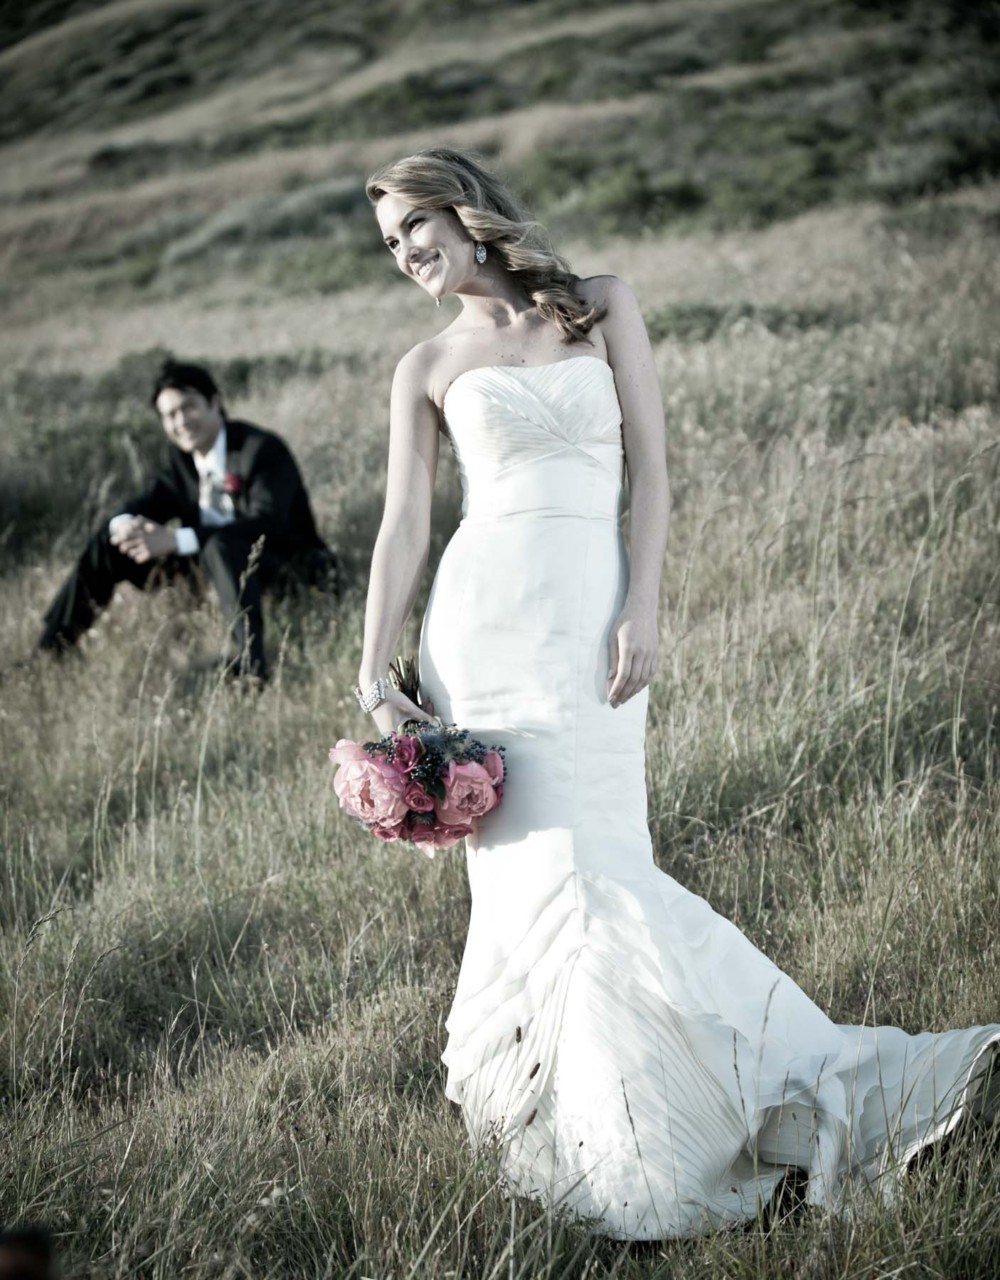 Looking for a destination wedding photographer in Big Lake?